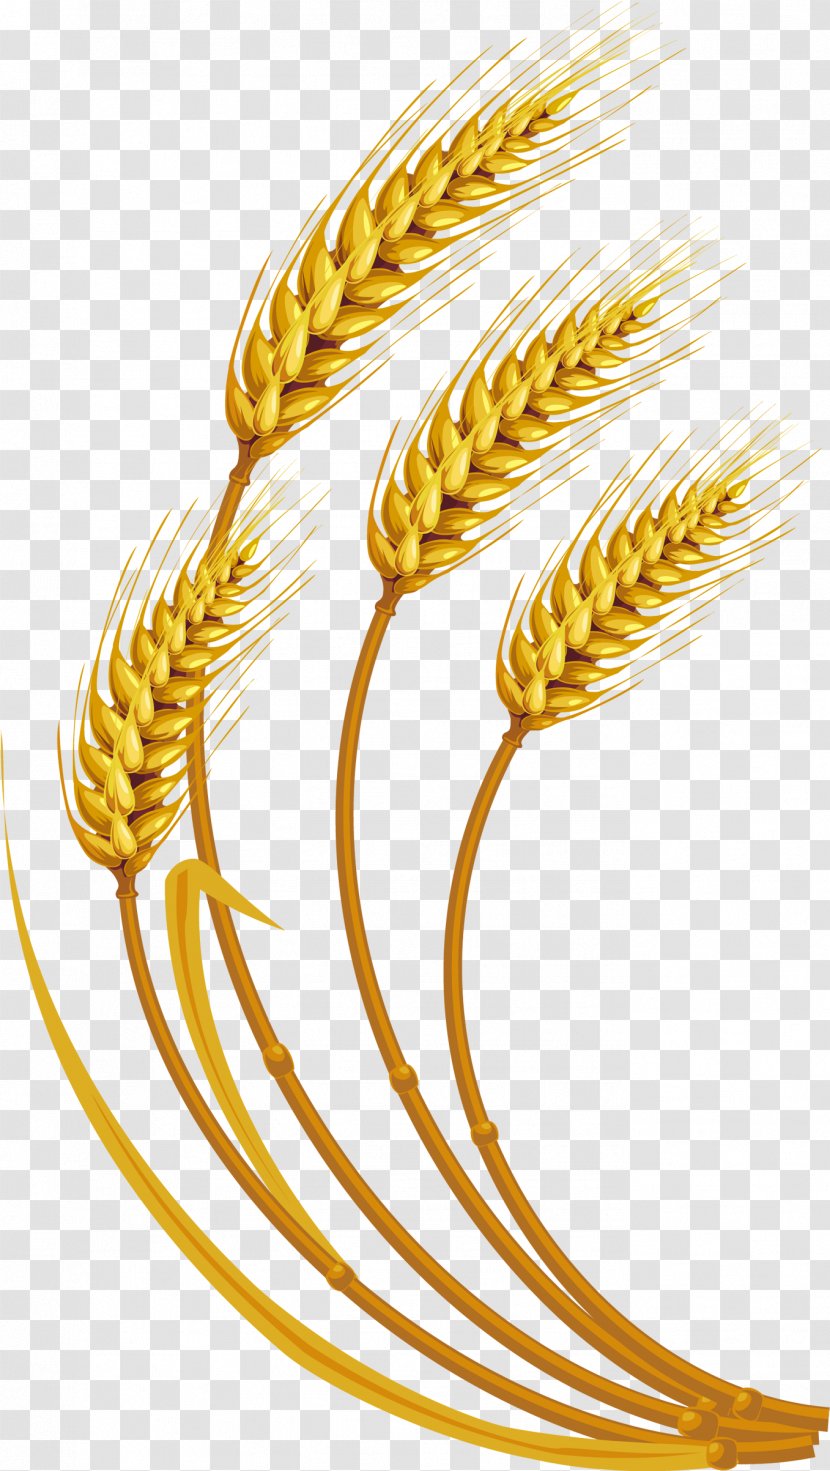 Wheat Grauds Cereal Clip Art Transparent PNG